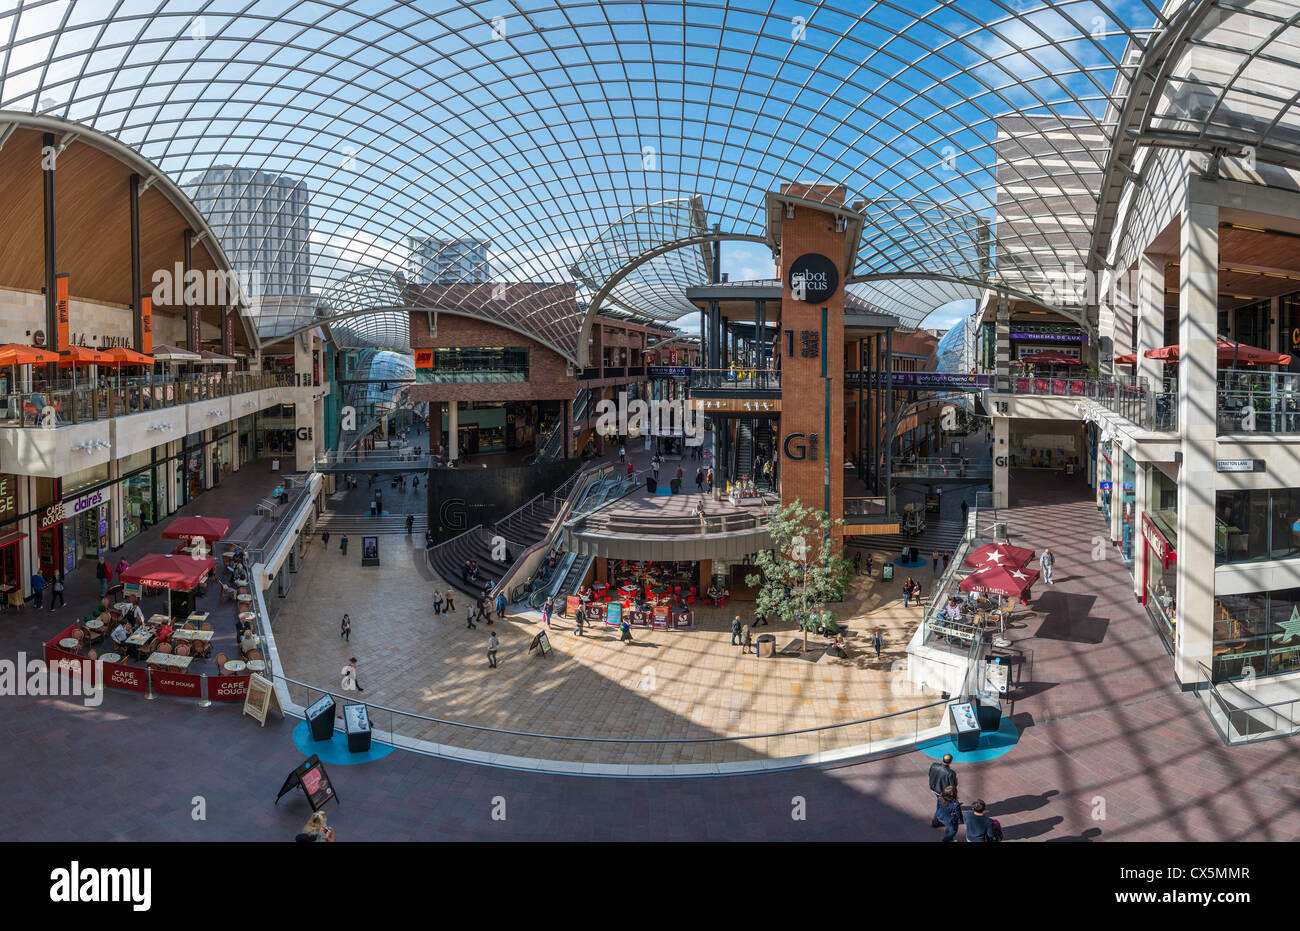 INTERIOR OF CABOT CIRCUS SHOPPING CENTRE SHOWINGGLASS ROOF AND SHOPPING LEVELS, BRISTOL ENGLAND UK Stock Photo